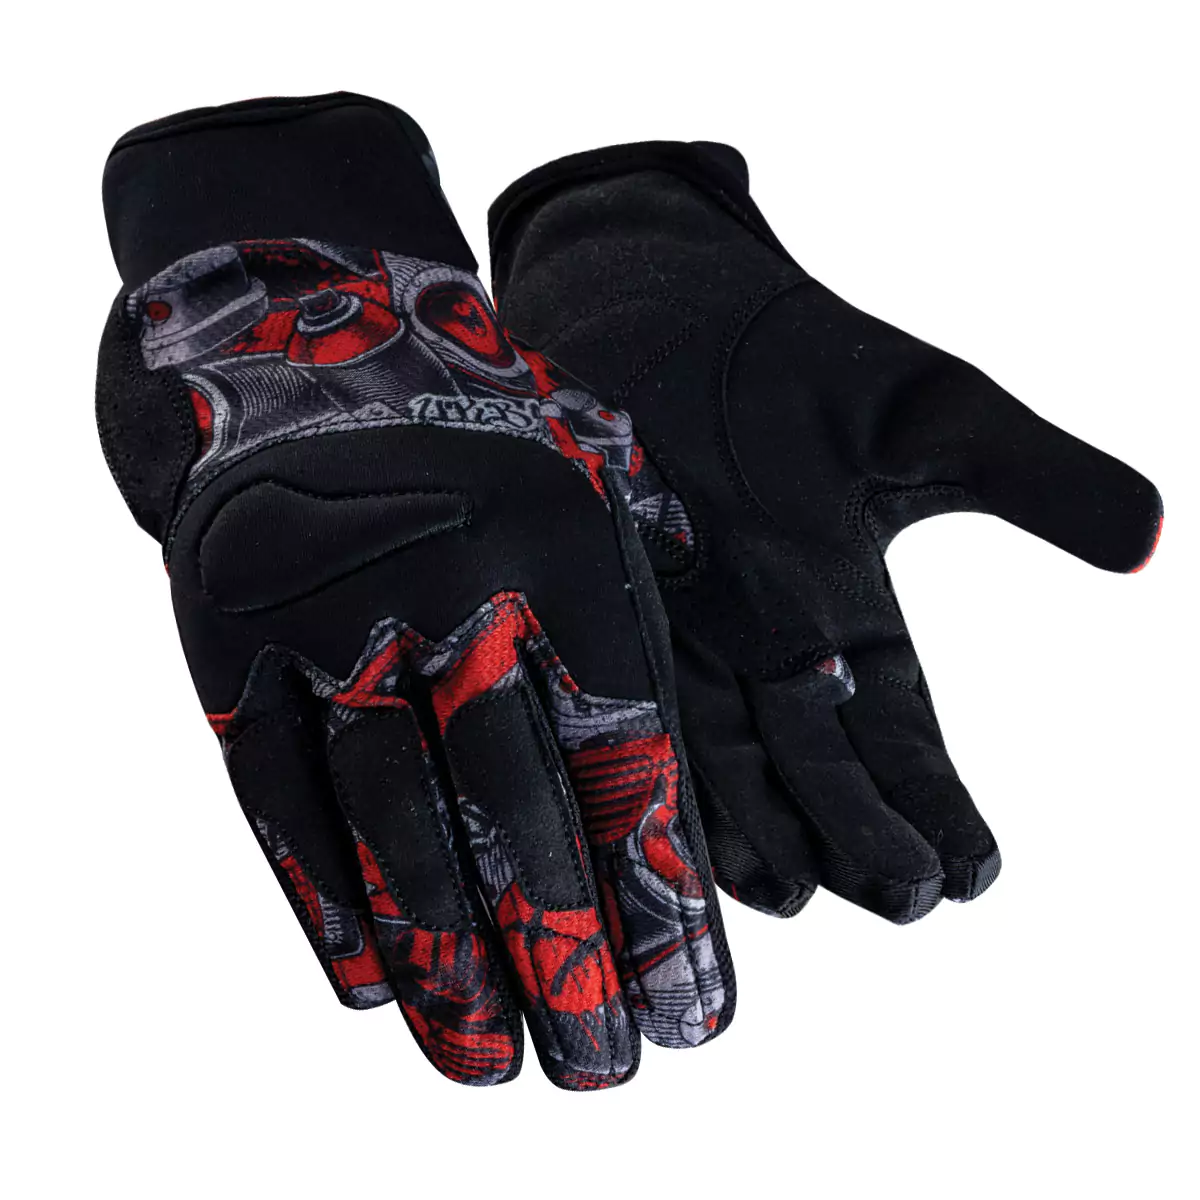 Pair of leather cycling gloves designed for comfort and grip during rides.